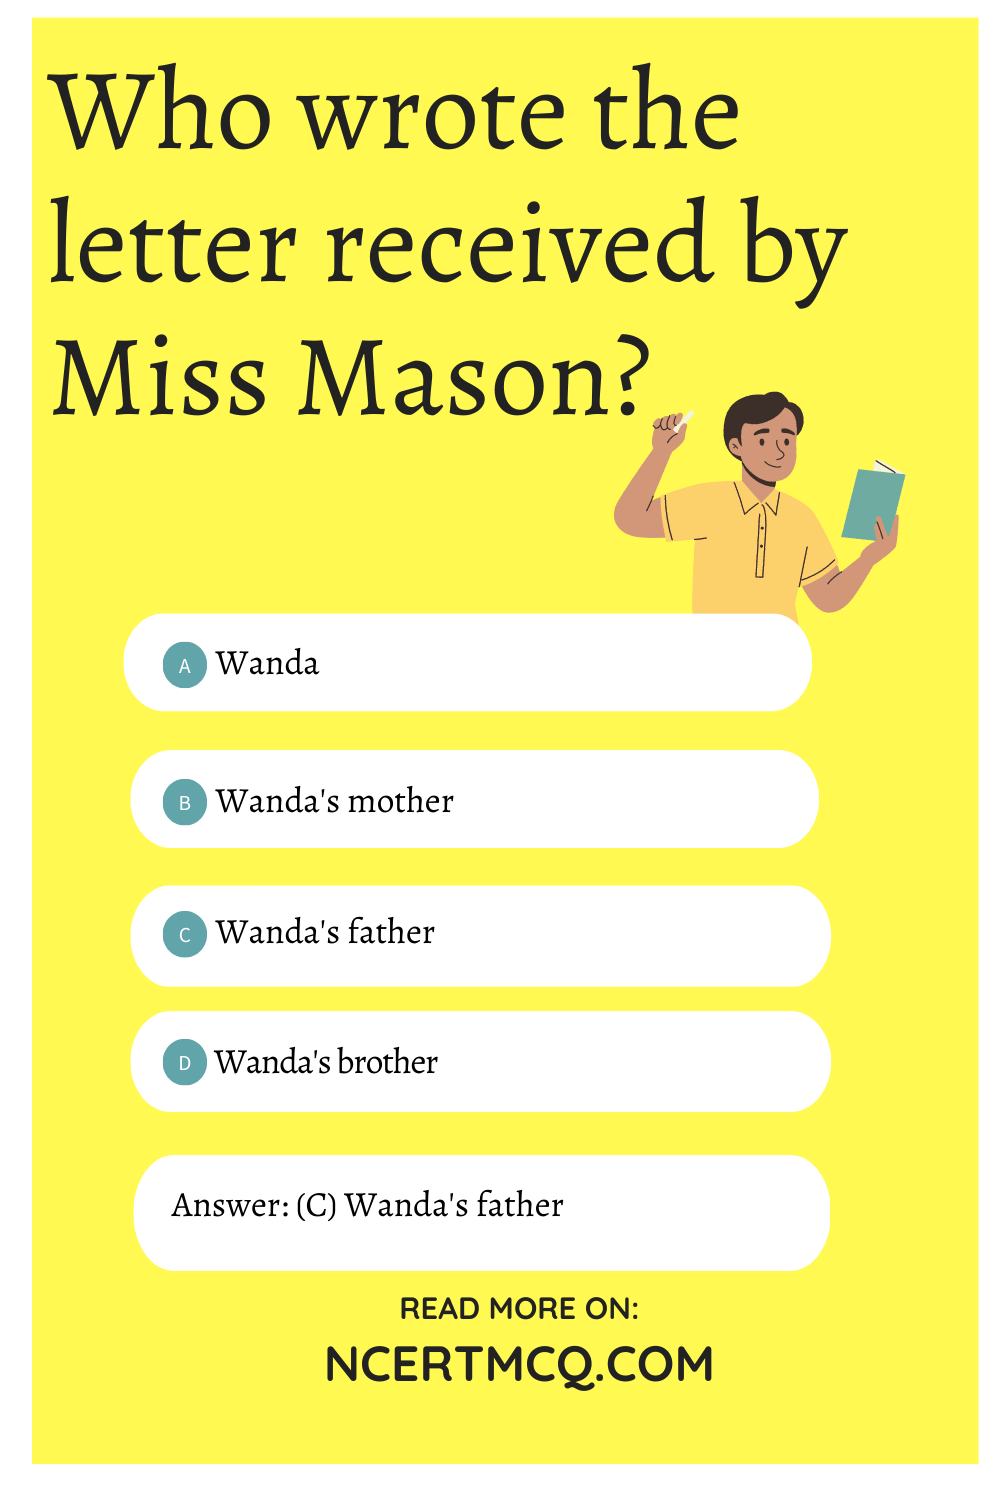 Who wrote the letter received by Miss Mason?